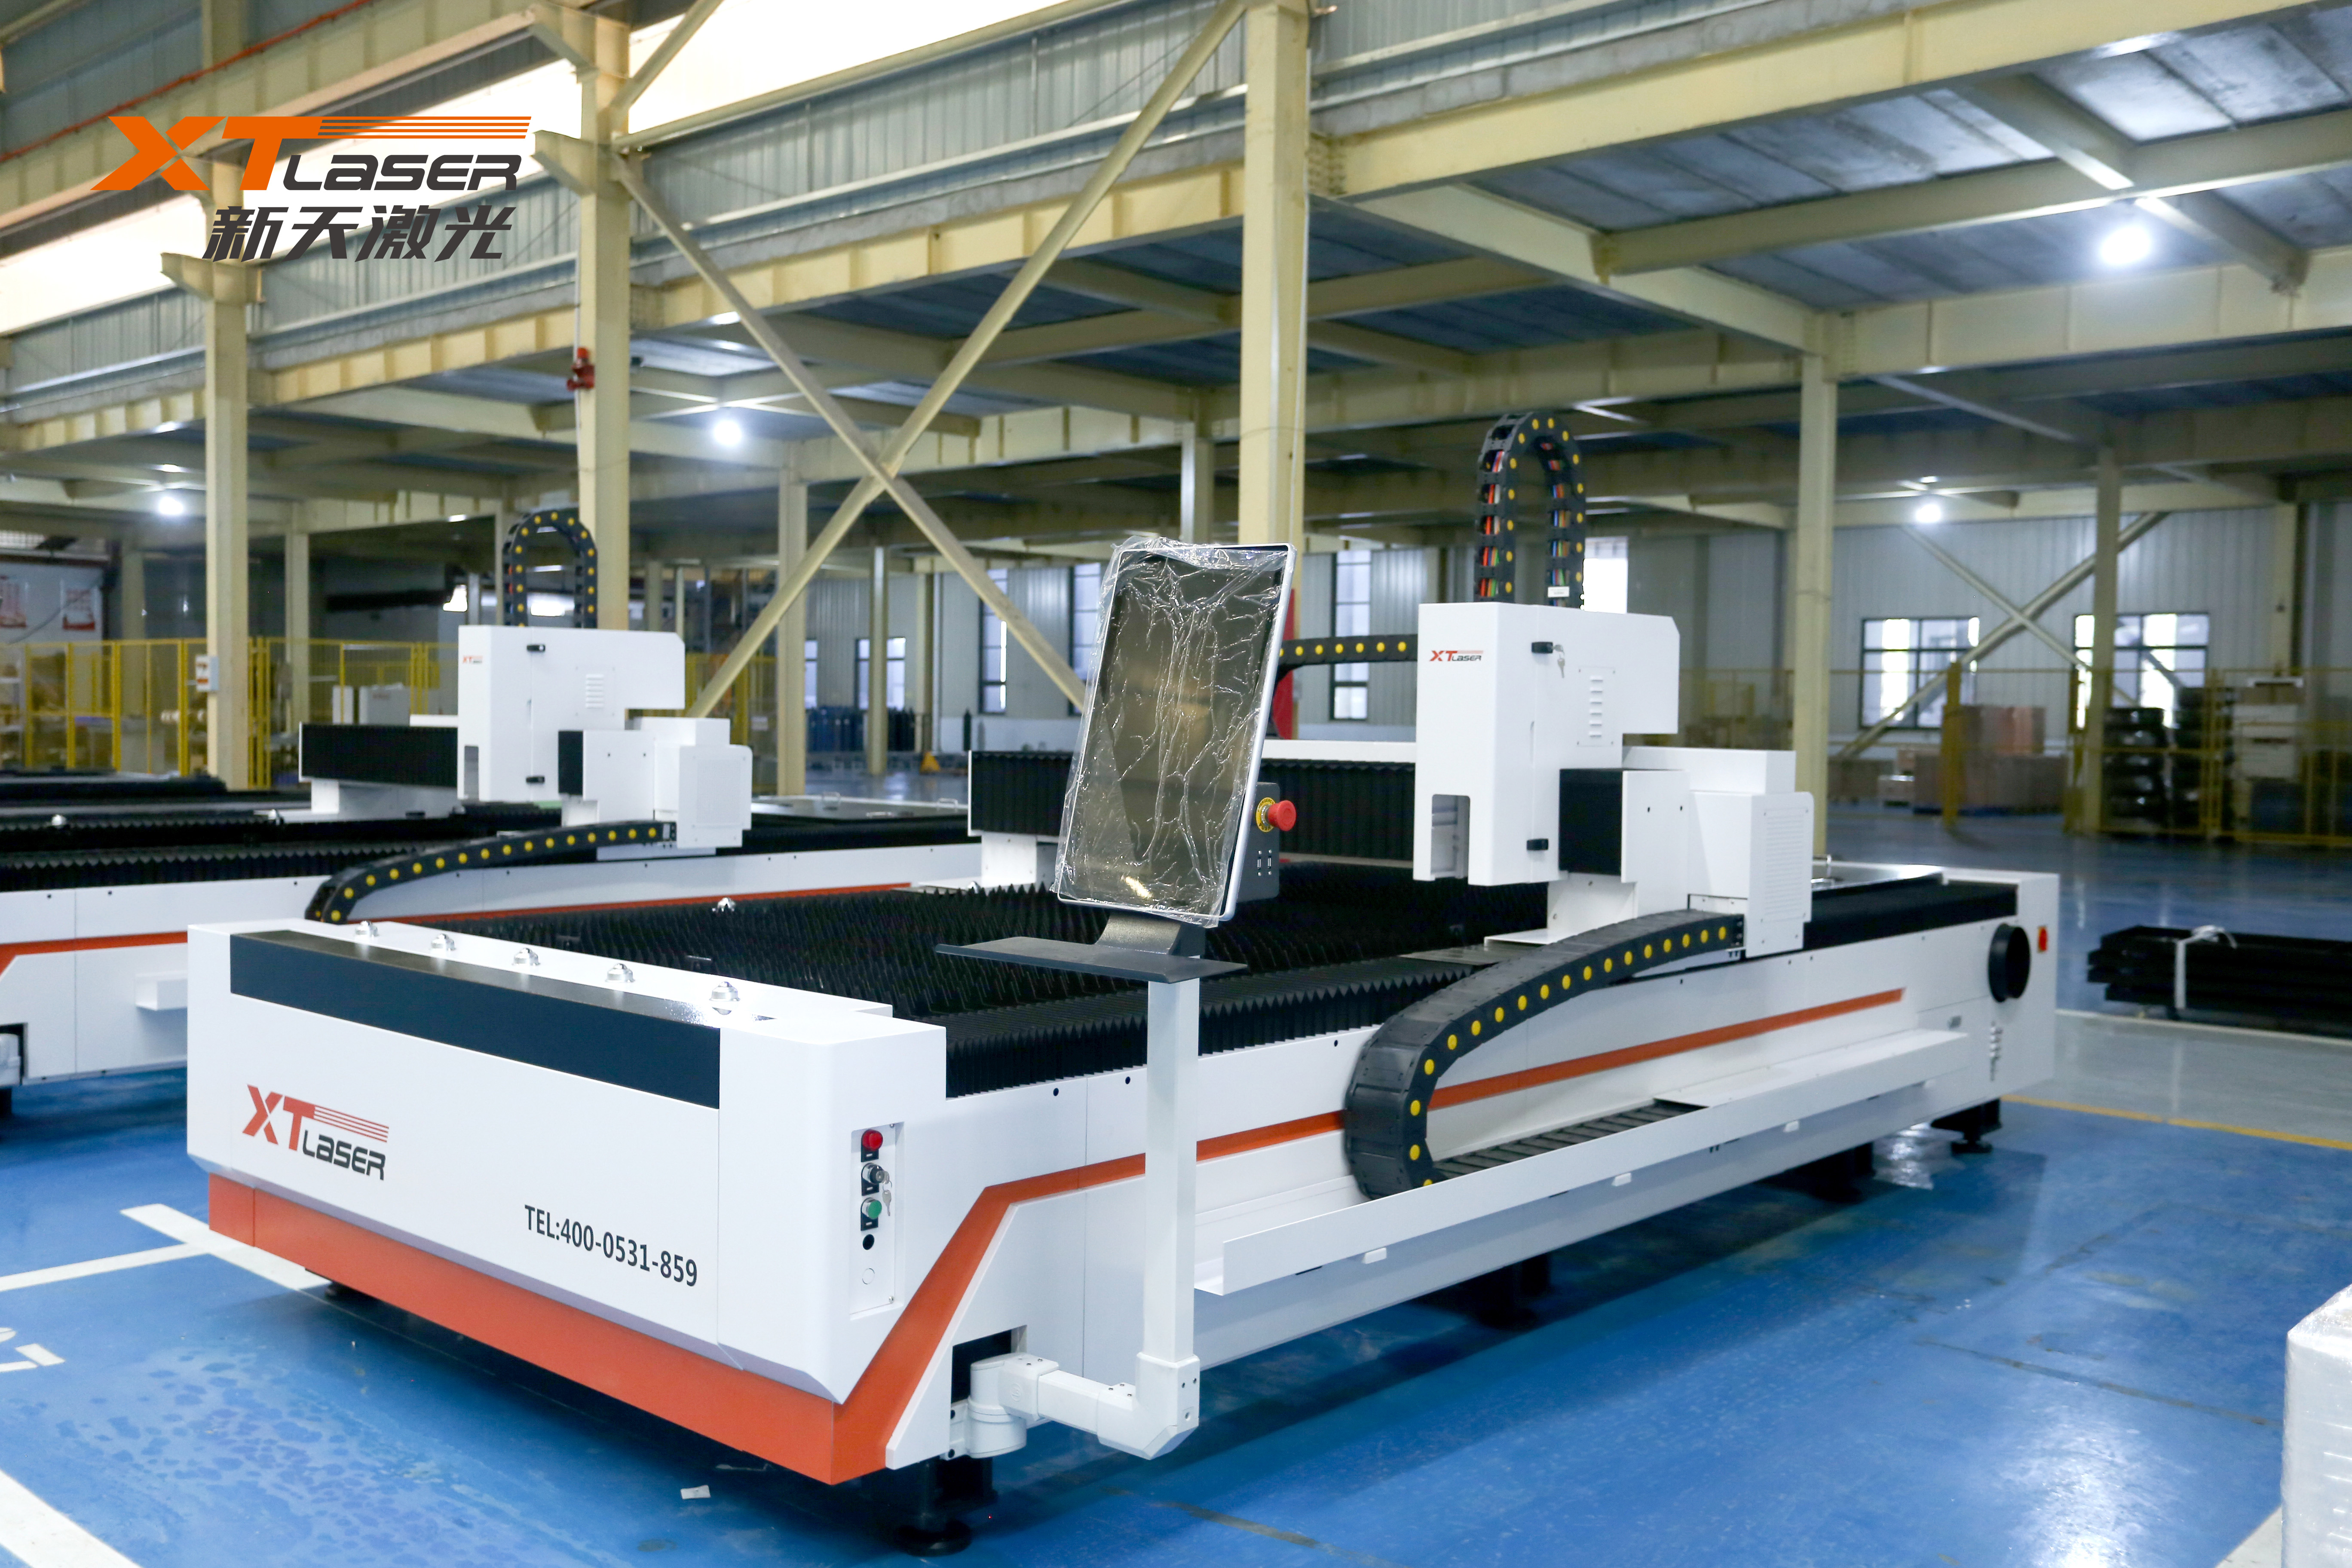 Which brand is better in China for the characteristics of laser cutting machines?